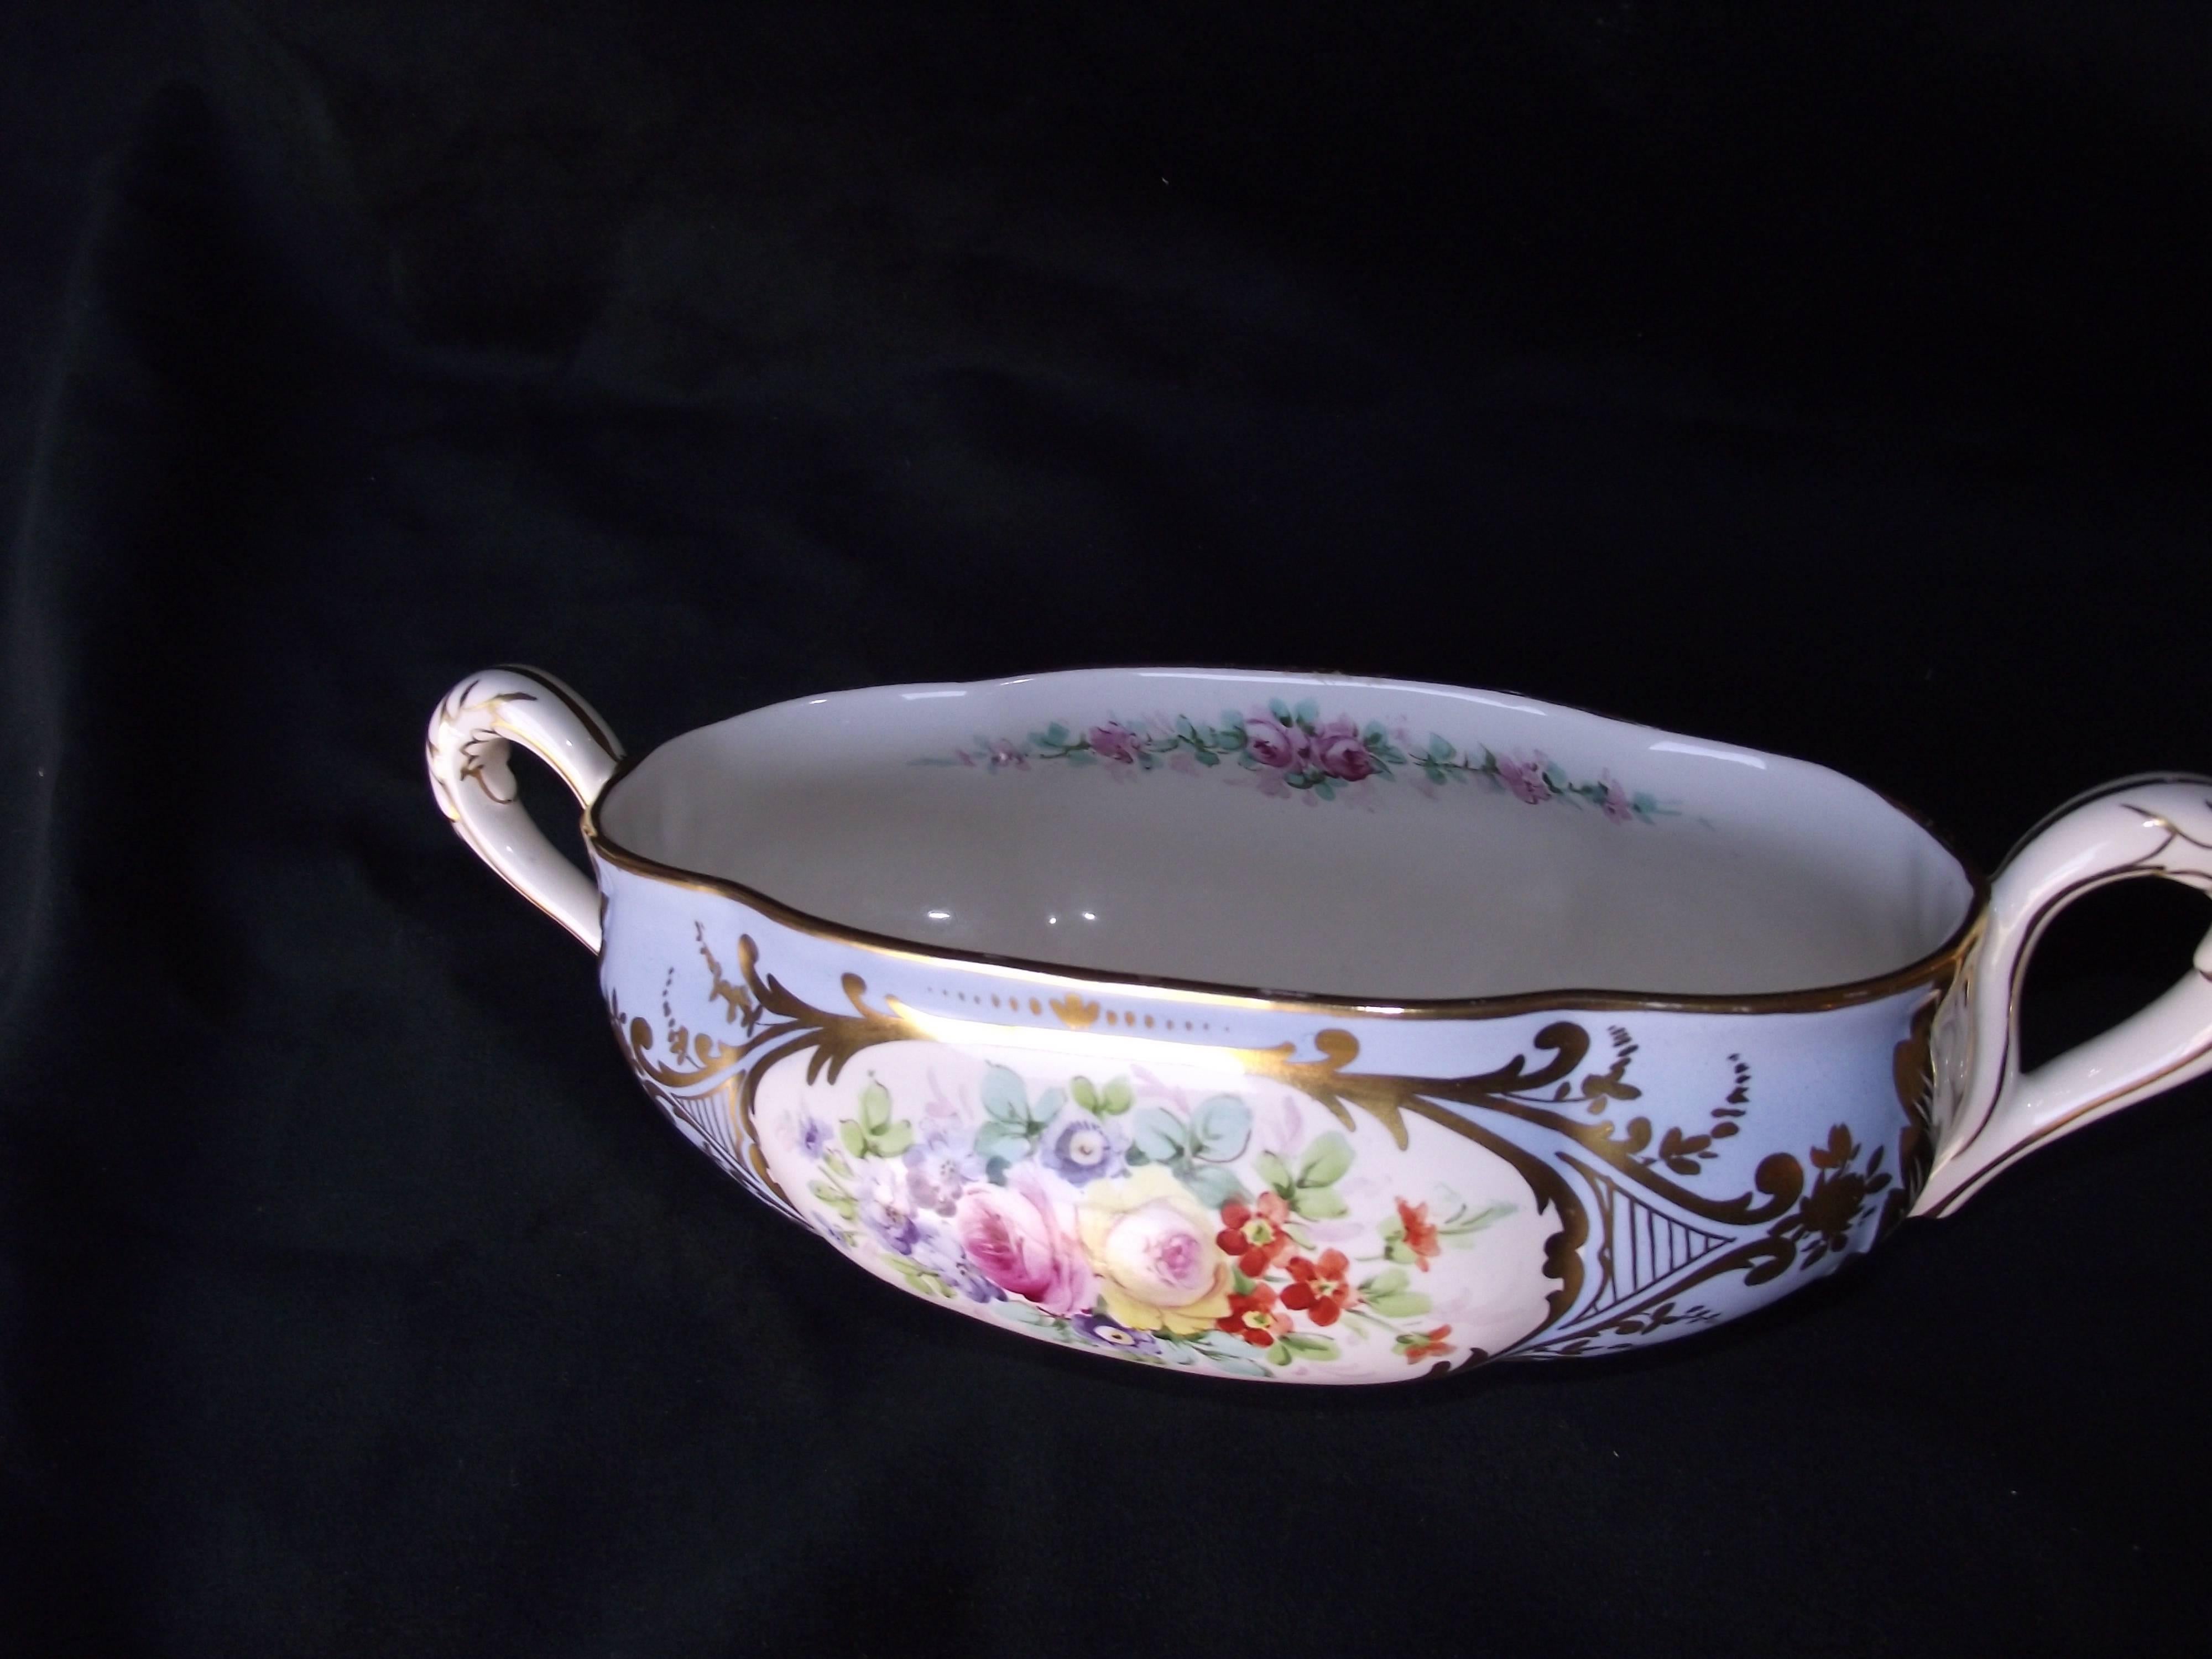 This beautifully decorated low bowl/vase/centerpiece was made by the Amoges China Co, out of Trenton, New Jersey only produced pottery from 1944-1948, making their pottery run very limited and highly sought after by collectors.